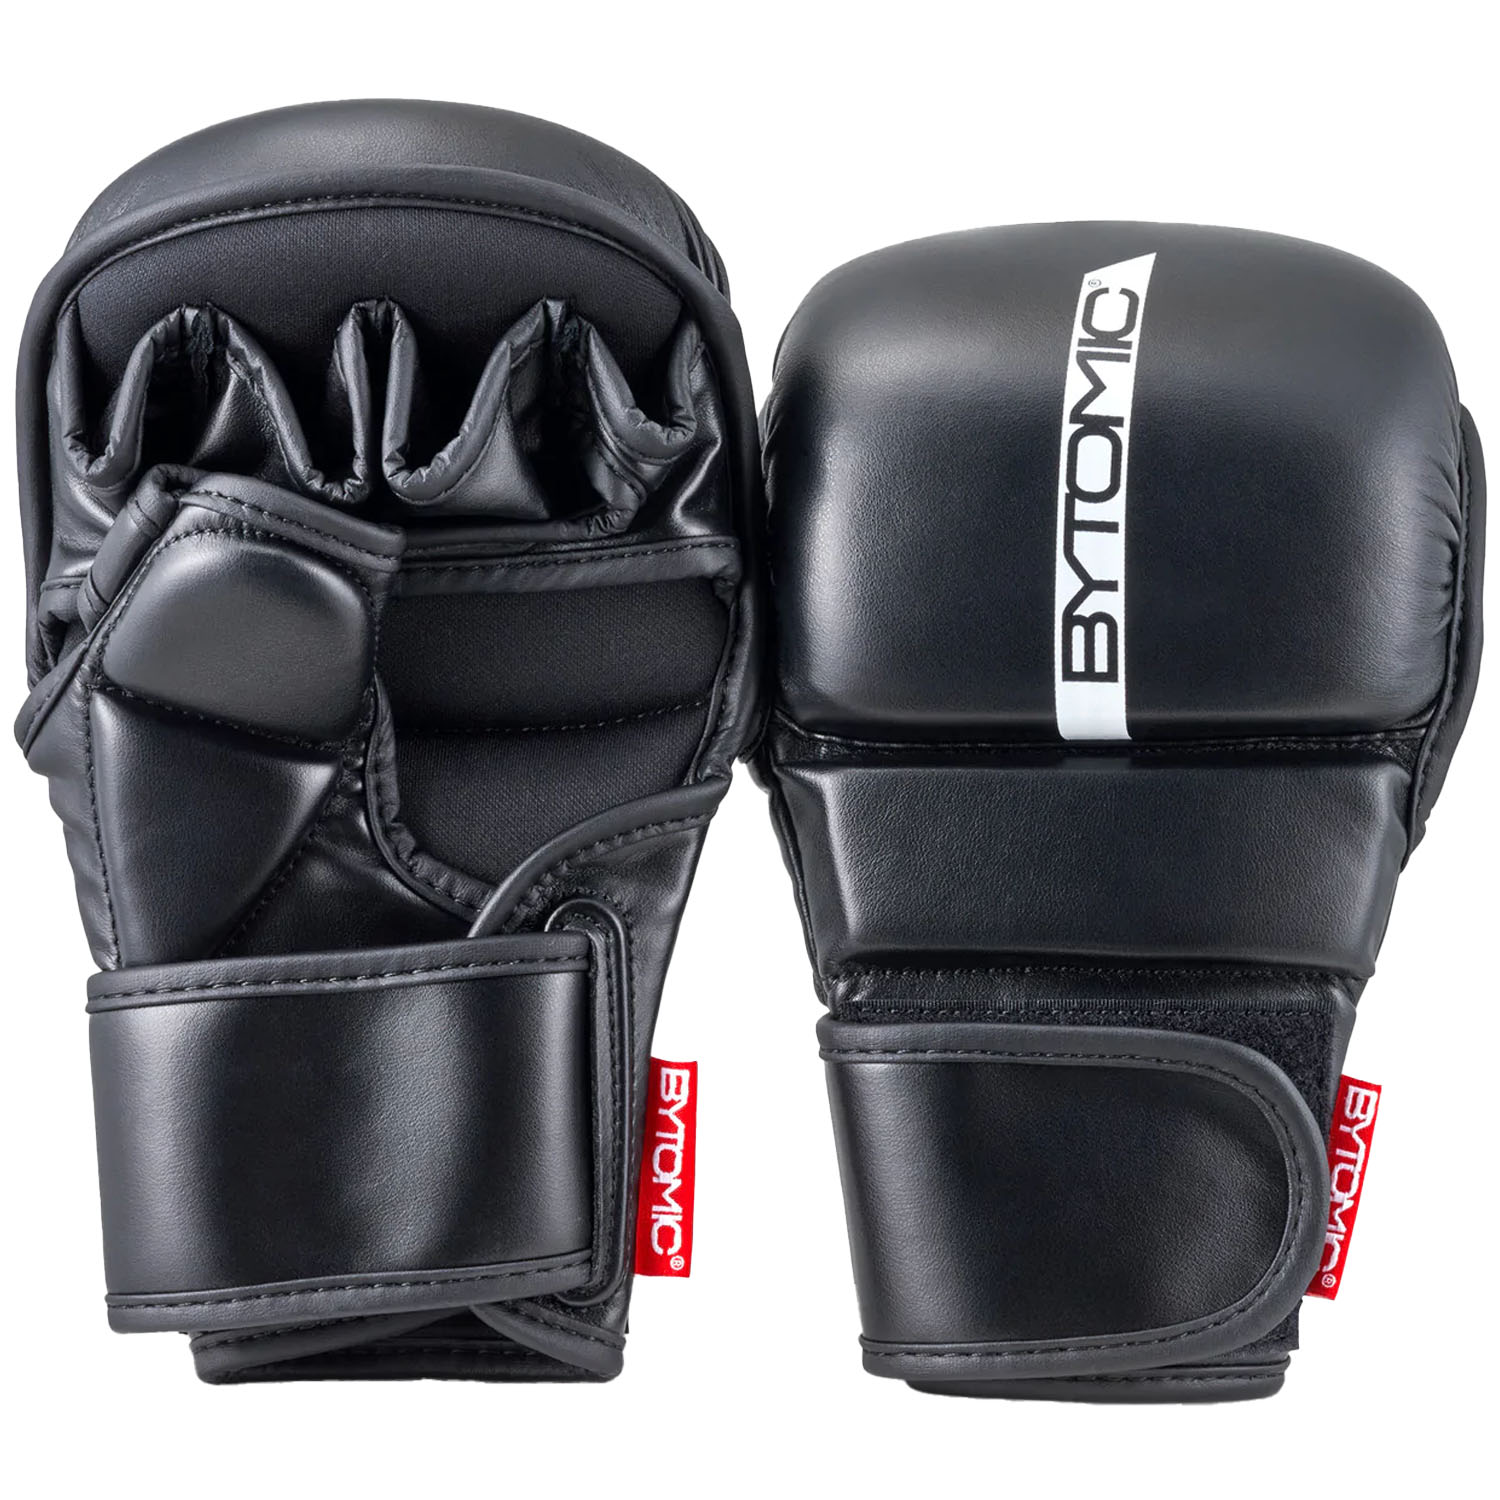 Bytomic MMA Sparring Boxhandschuhe, Red Label, schwarz